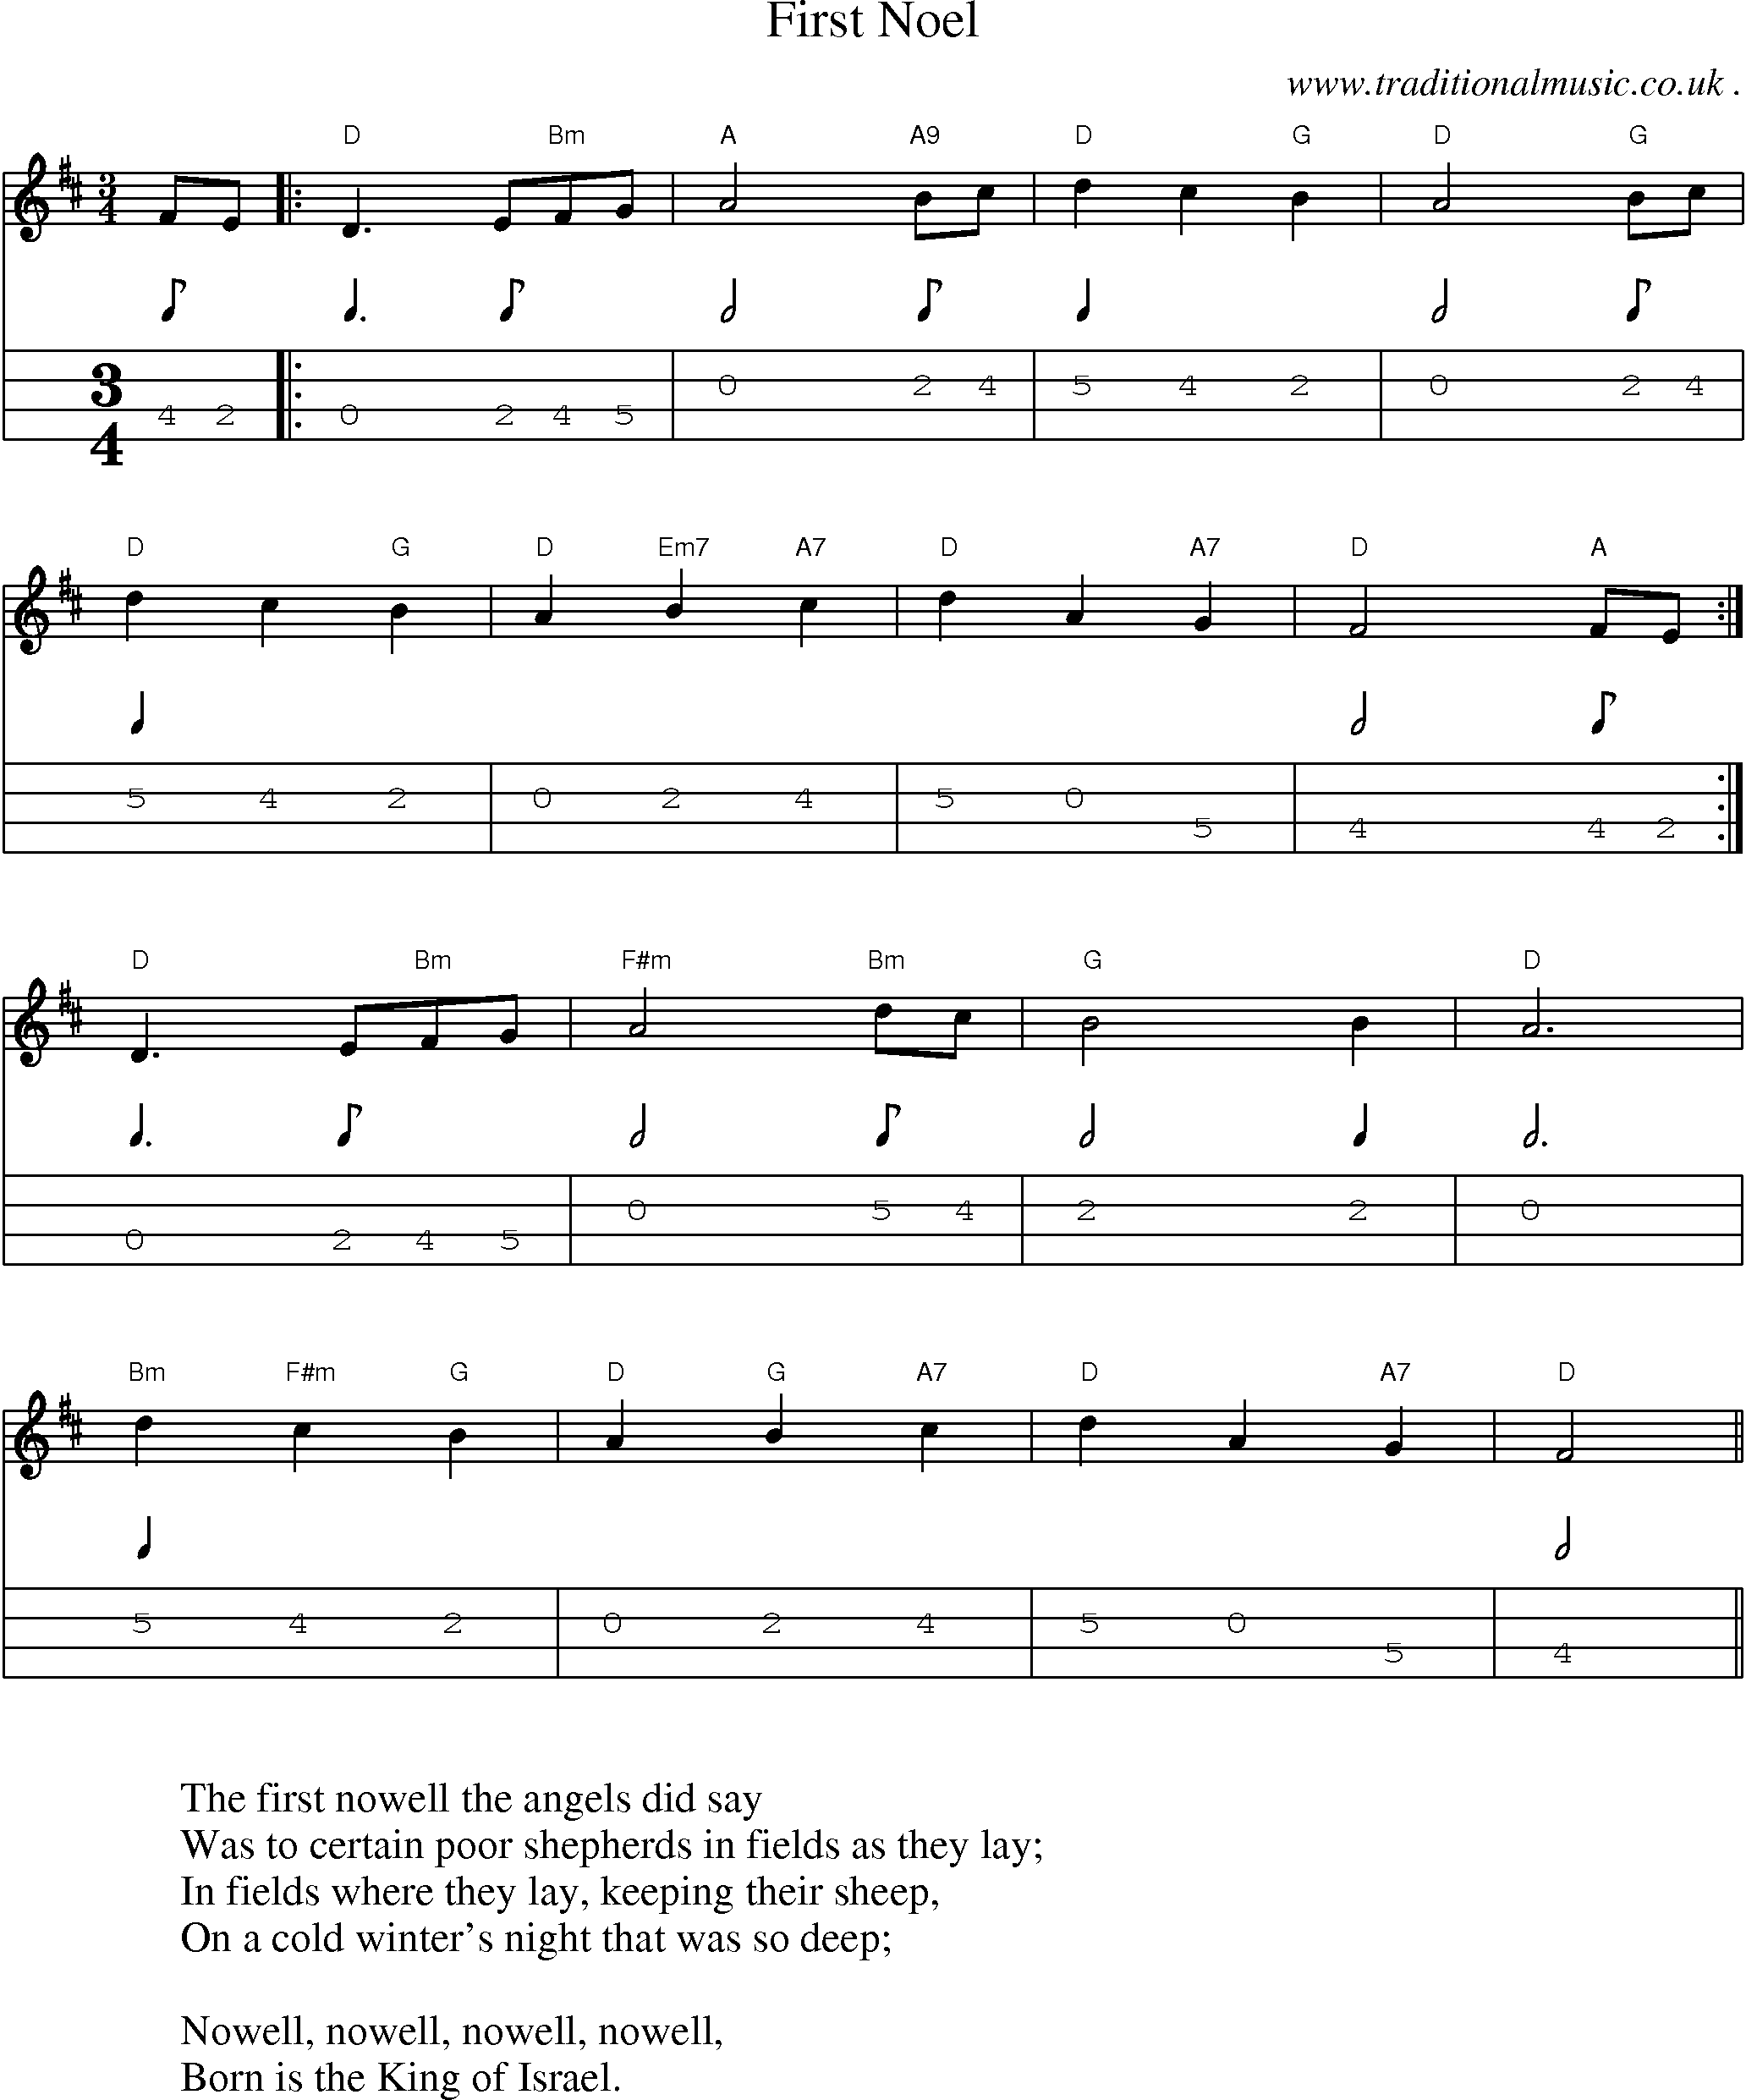 Music Score and Guitar Tabs for First Noel